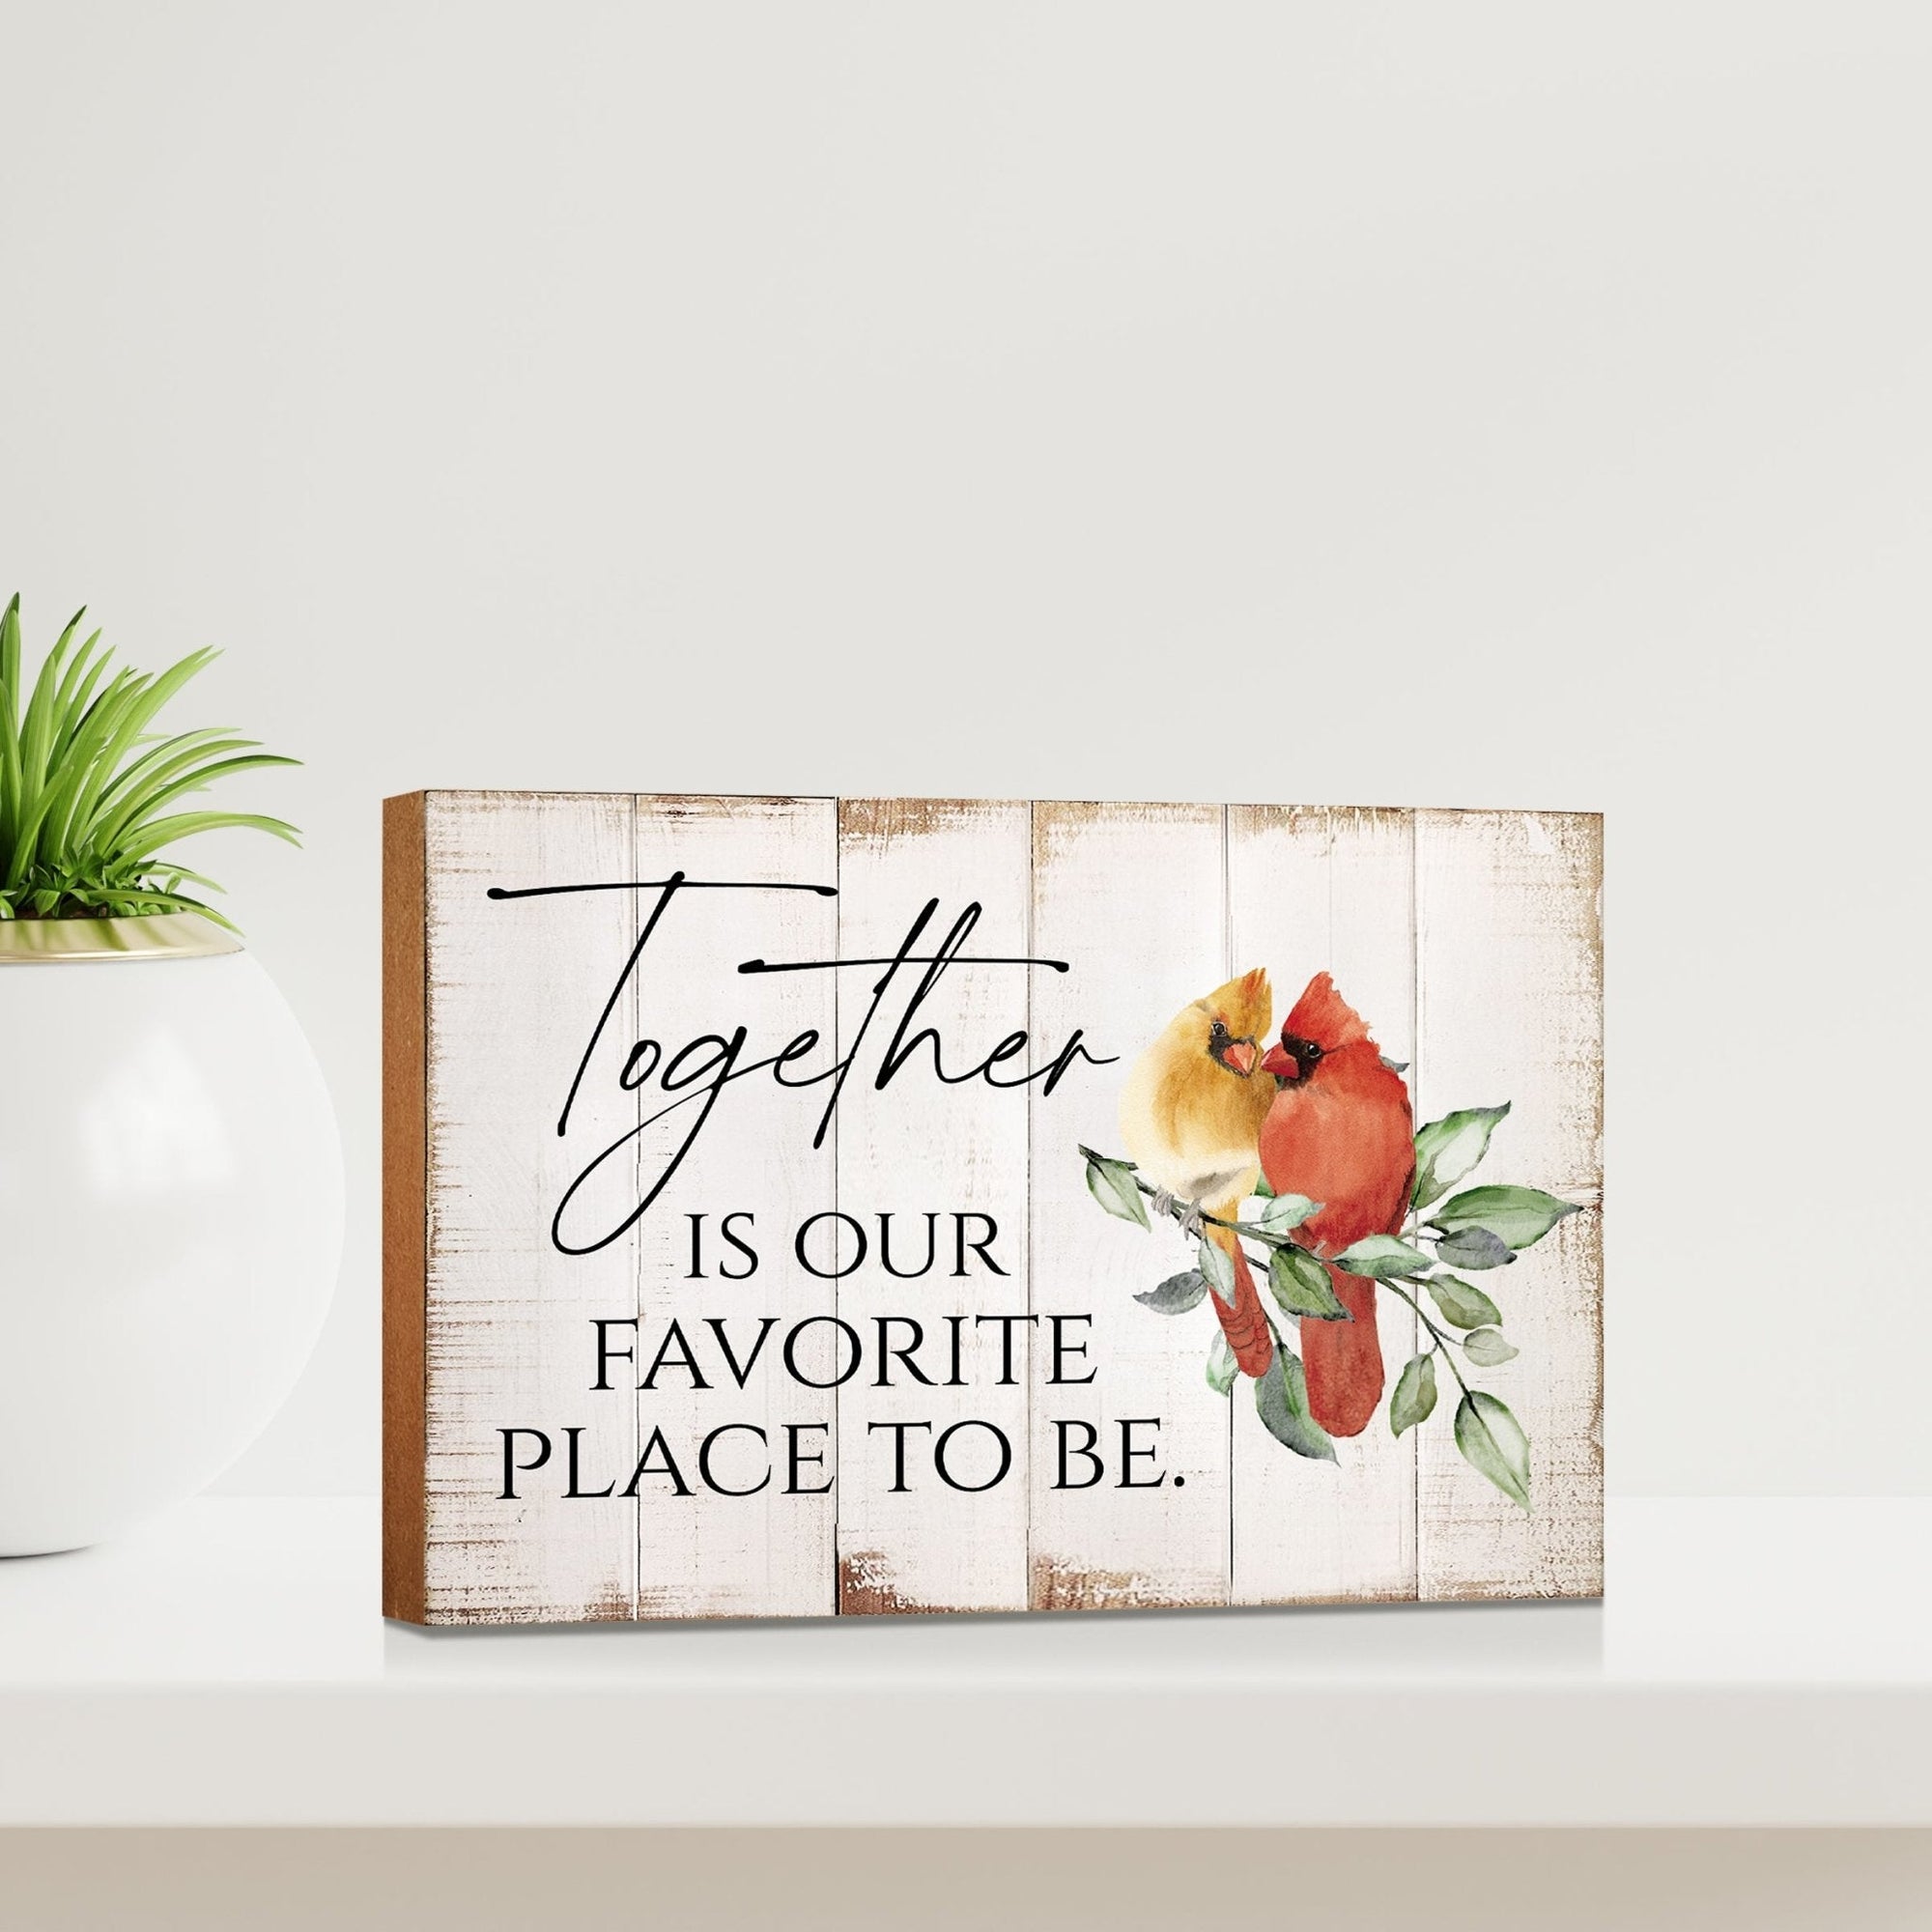 Tabletop Signs for Home Decor - Inspiring Wooden Signage to Brighten Your Space